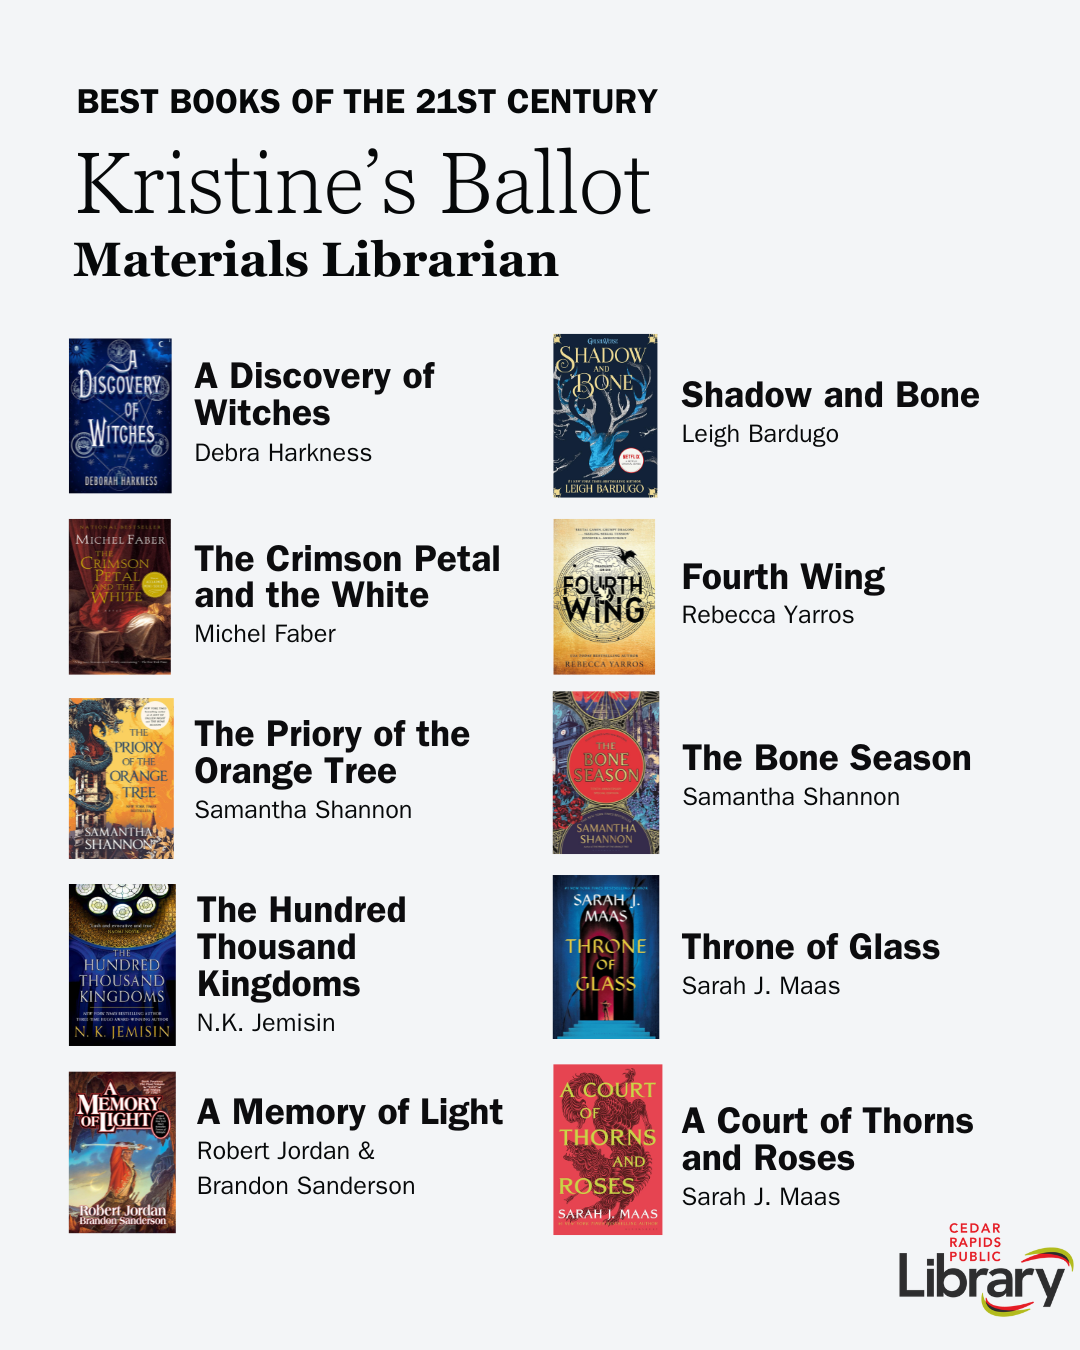 A graphic shows Material Librarian Kristine's Ballot for Best Books of the 21st Century